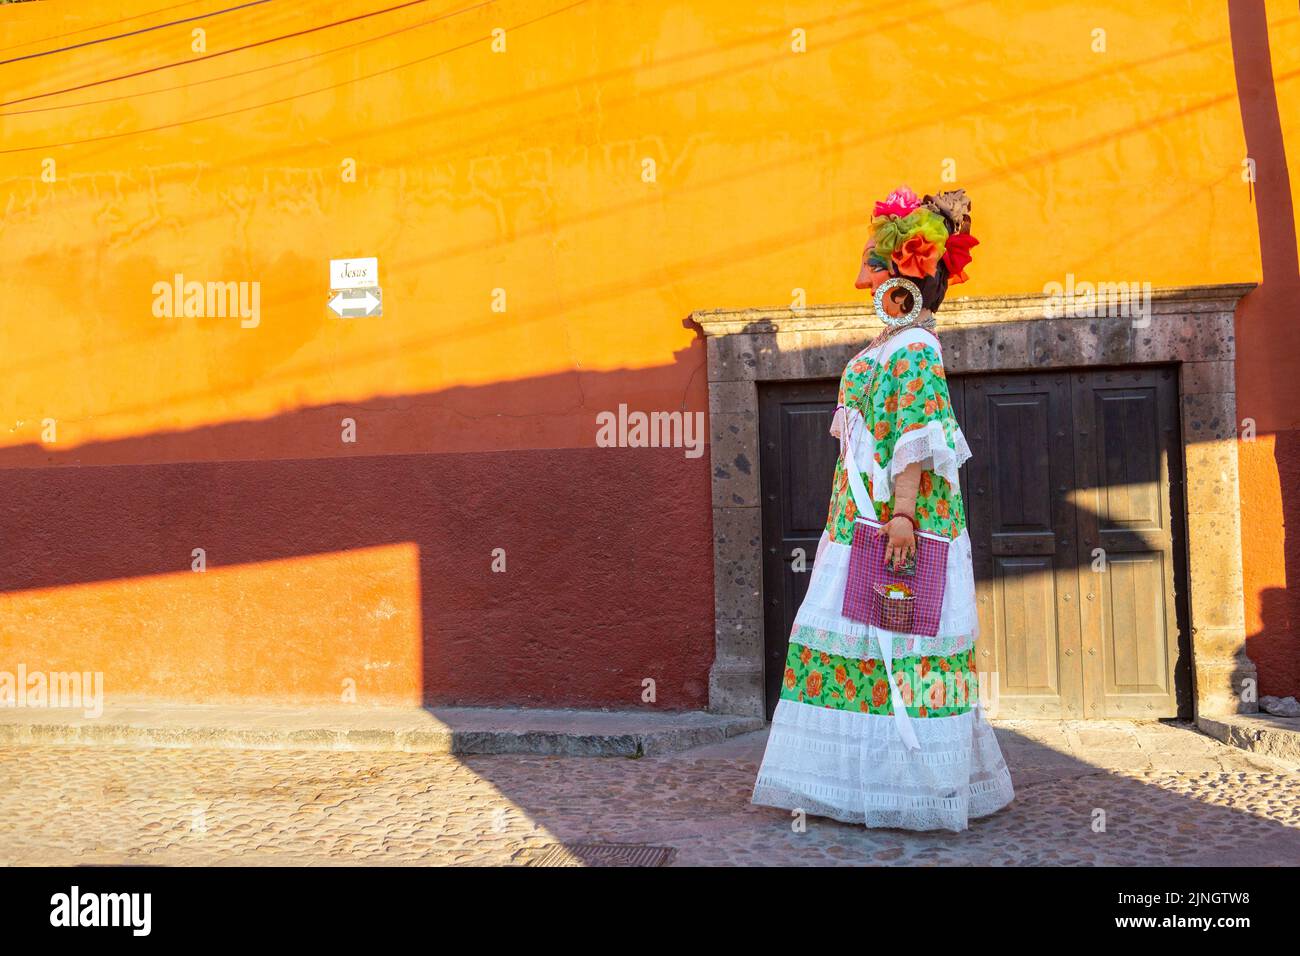 A mojiganga, or giant puppet made from papier mâché walks through the historic city center of San Miguel de Allende, Mexico. Stock Photo